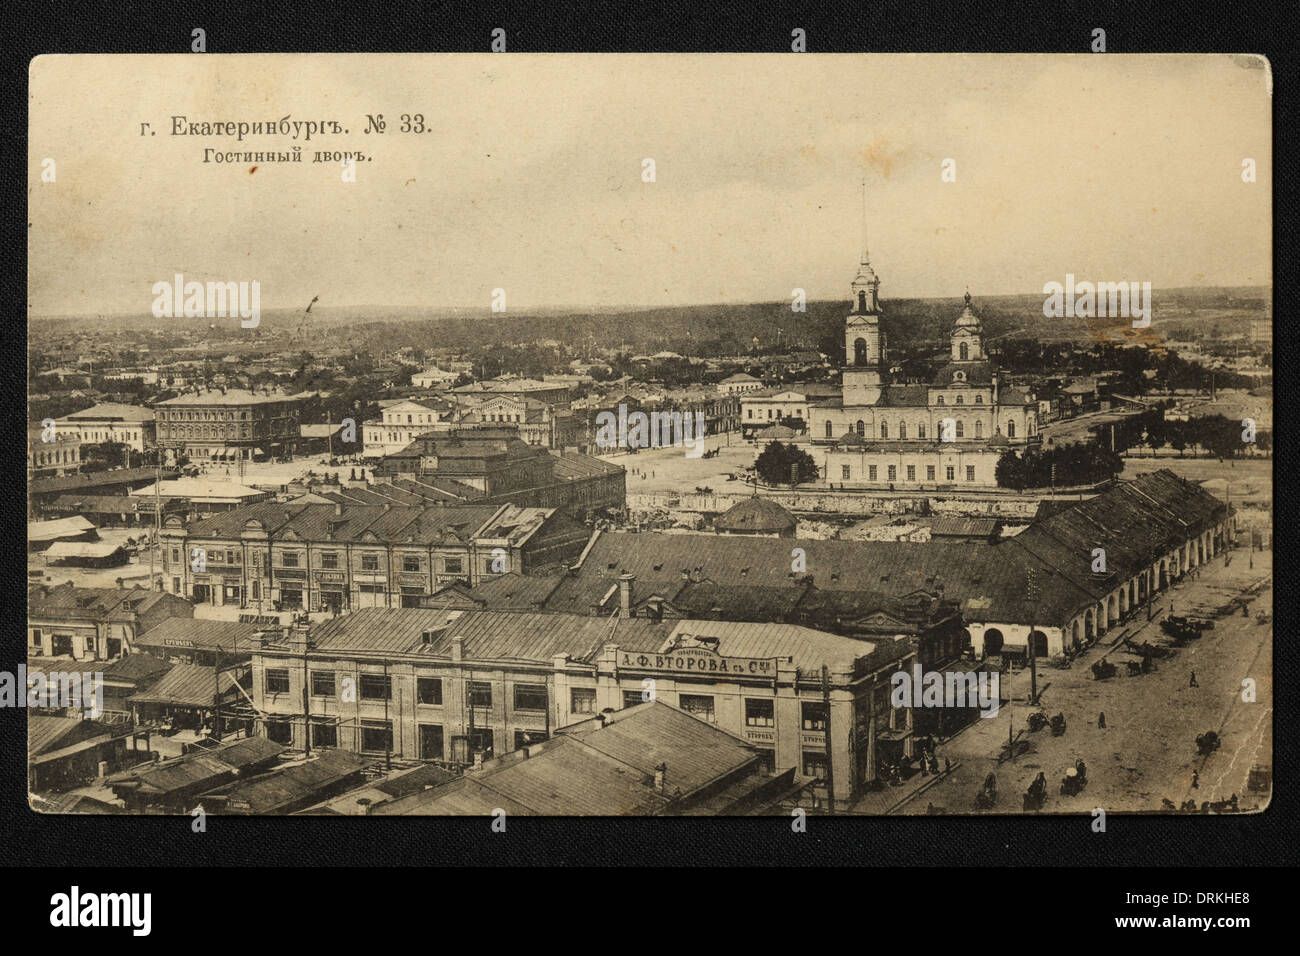 Merchant Court (Gostiny Dvor) and the Cathedral Square in Yekaterinburg, Russian Empire. Black and white vintage photograph by an unknown photographer dated from the beginning of the 20th century issued in the Russian vintage postcard published by A.S. Suvorin, Yekaterinburg. Text in Russian: Yekaterinburg. Merchant Court. View from the bell tower of the Great Zlatoust Church. The Cathedral of the Exaltation of the Cross on Cathedral Square is seen in the background. The Cathedral was demolished by the Bolsheviks in the 1930s. The Gostiny Dvor is a historic Russian term for an indoor market, o Stock Photo